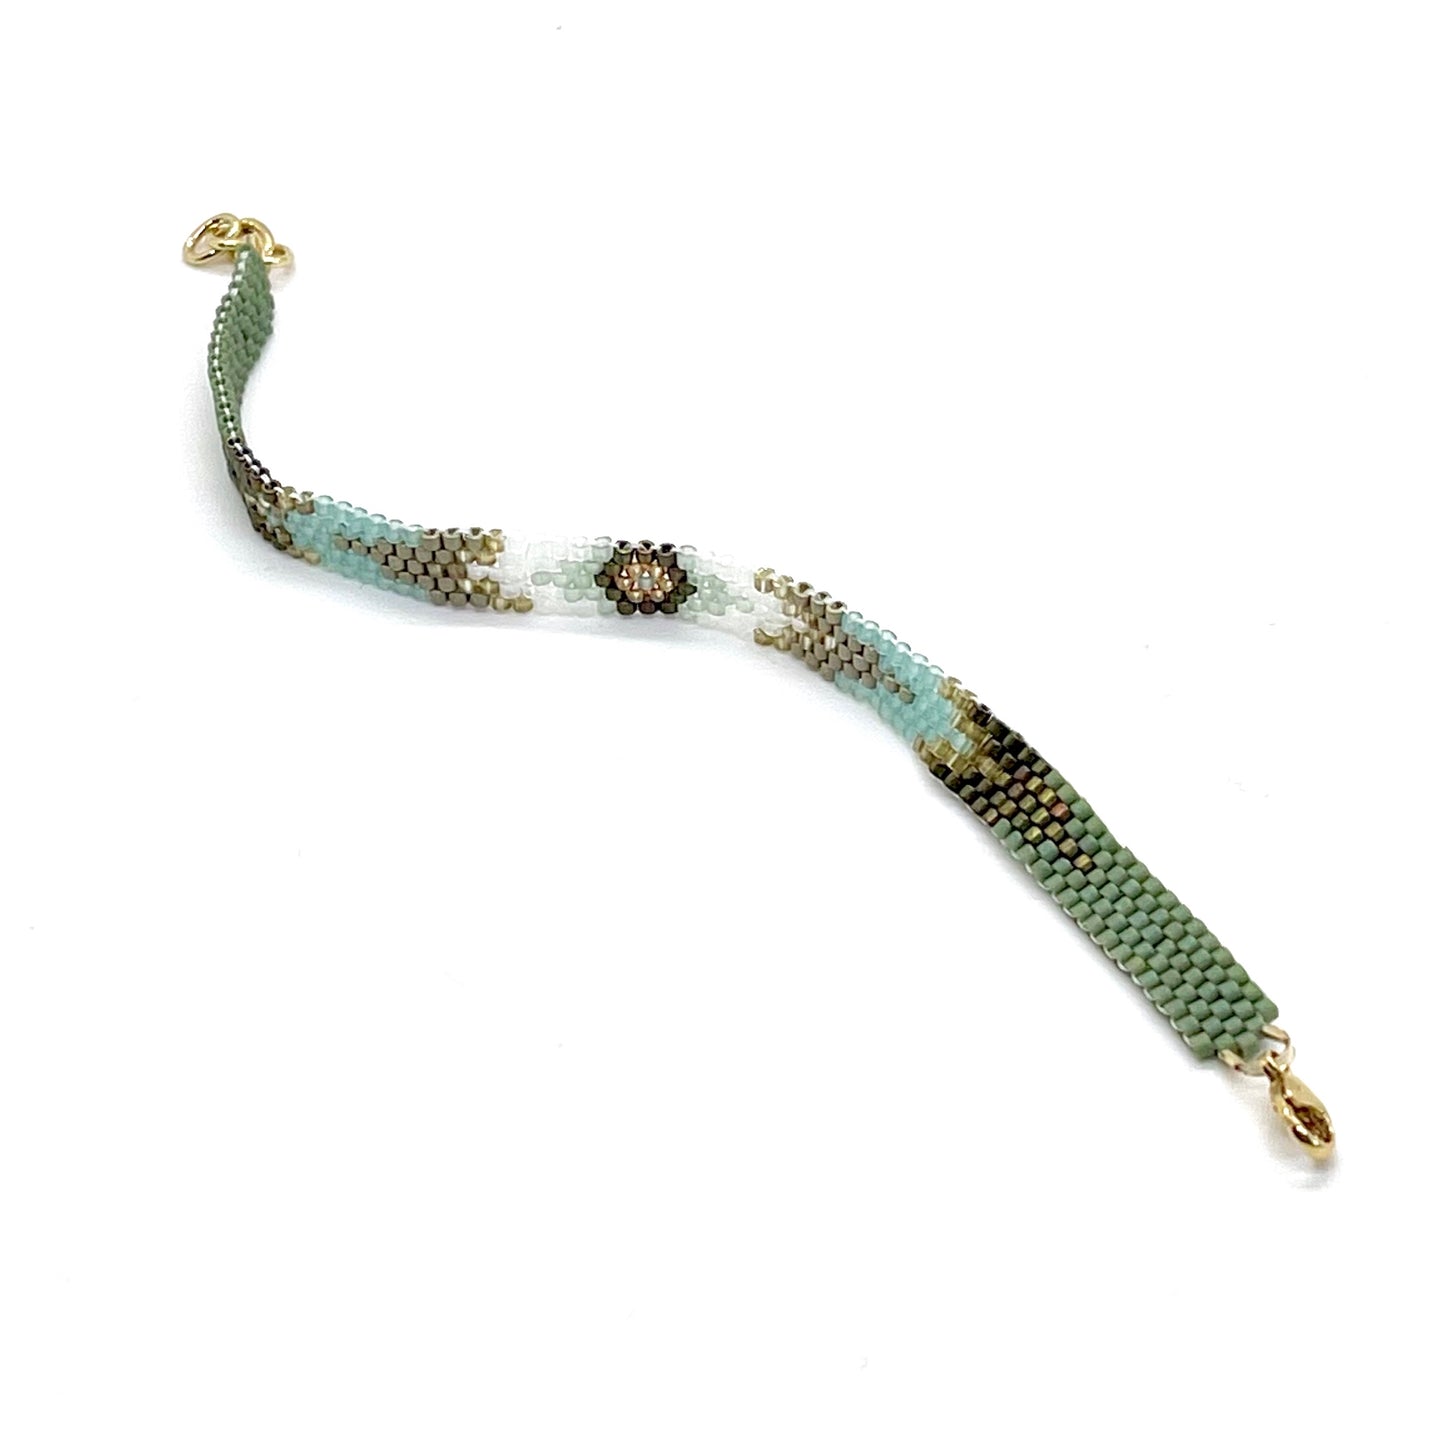 Green beaded bracelet with ivory and gold seed beads in an arrow pattern. Hand woven peyote stitch bracelet.